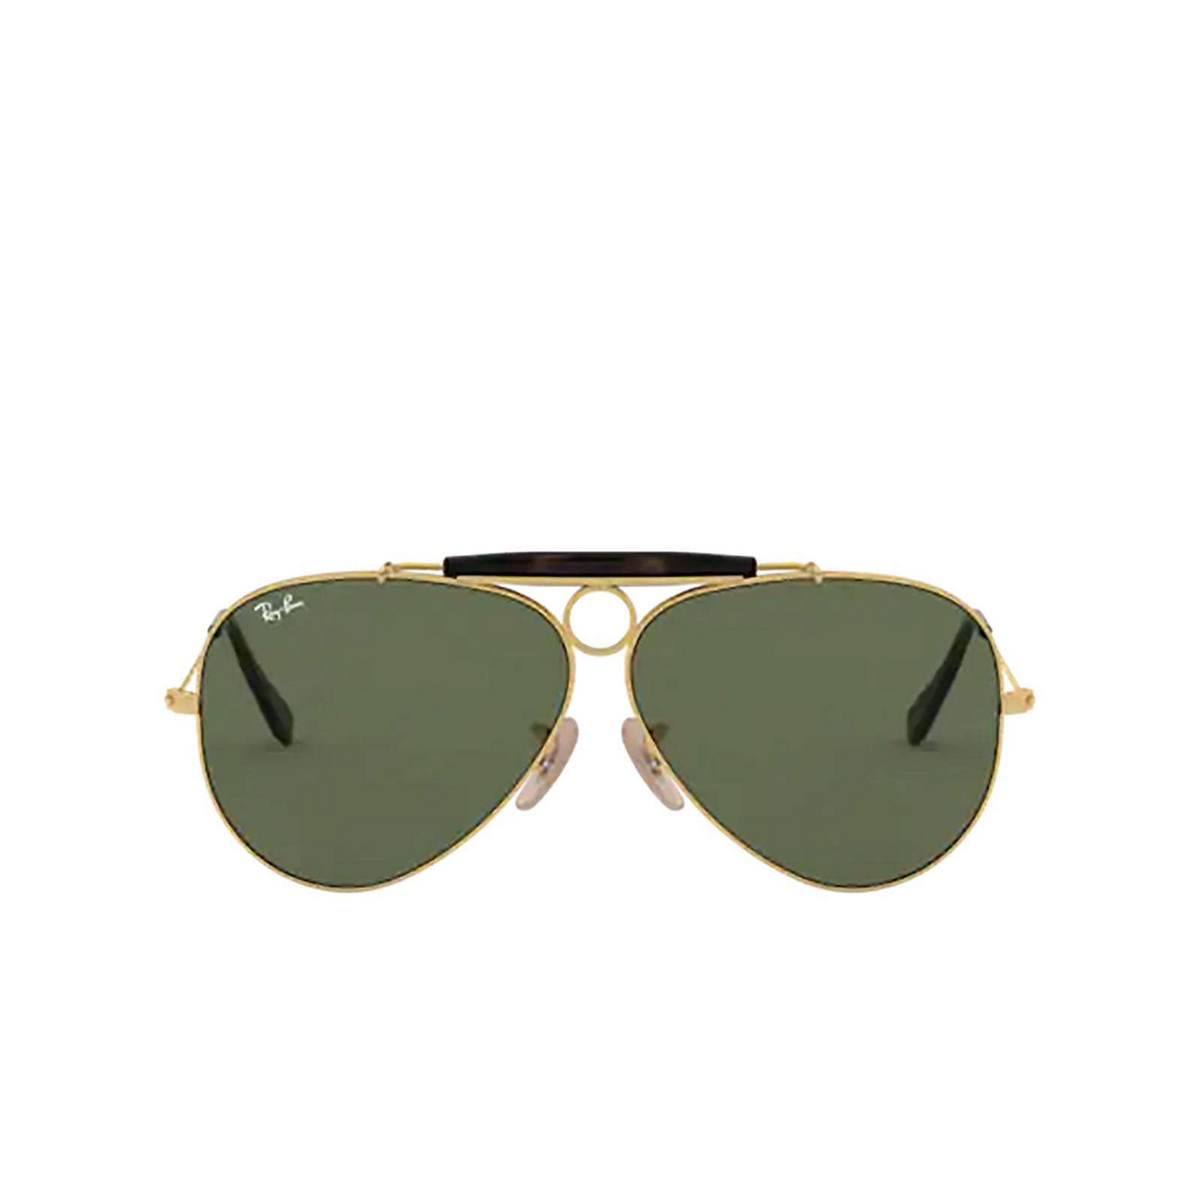 Ray-Ban SHOOTER Sunglasses 181 ARISTA - front view